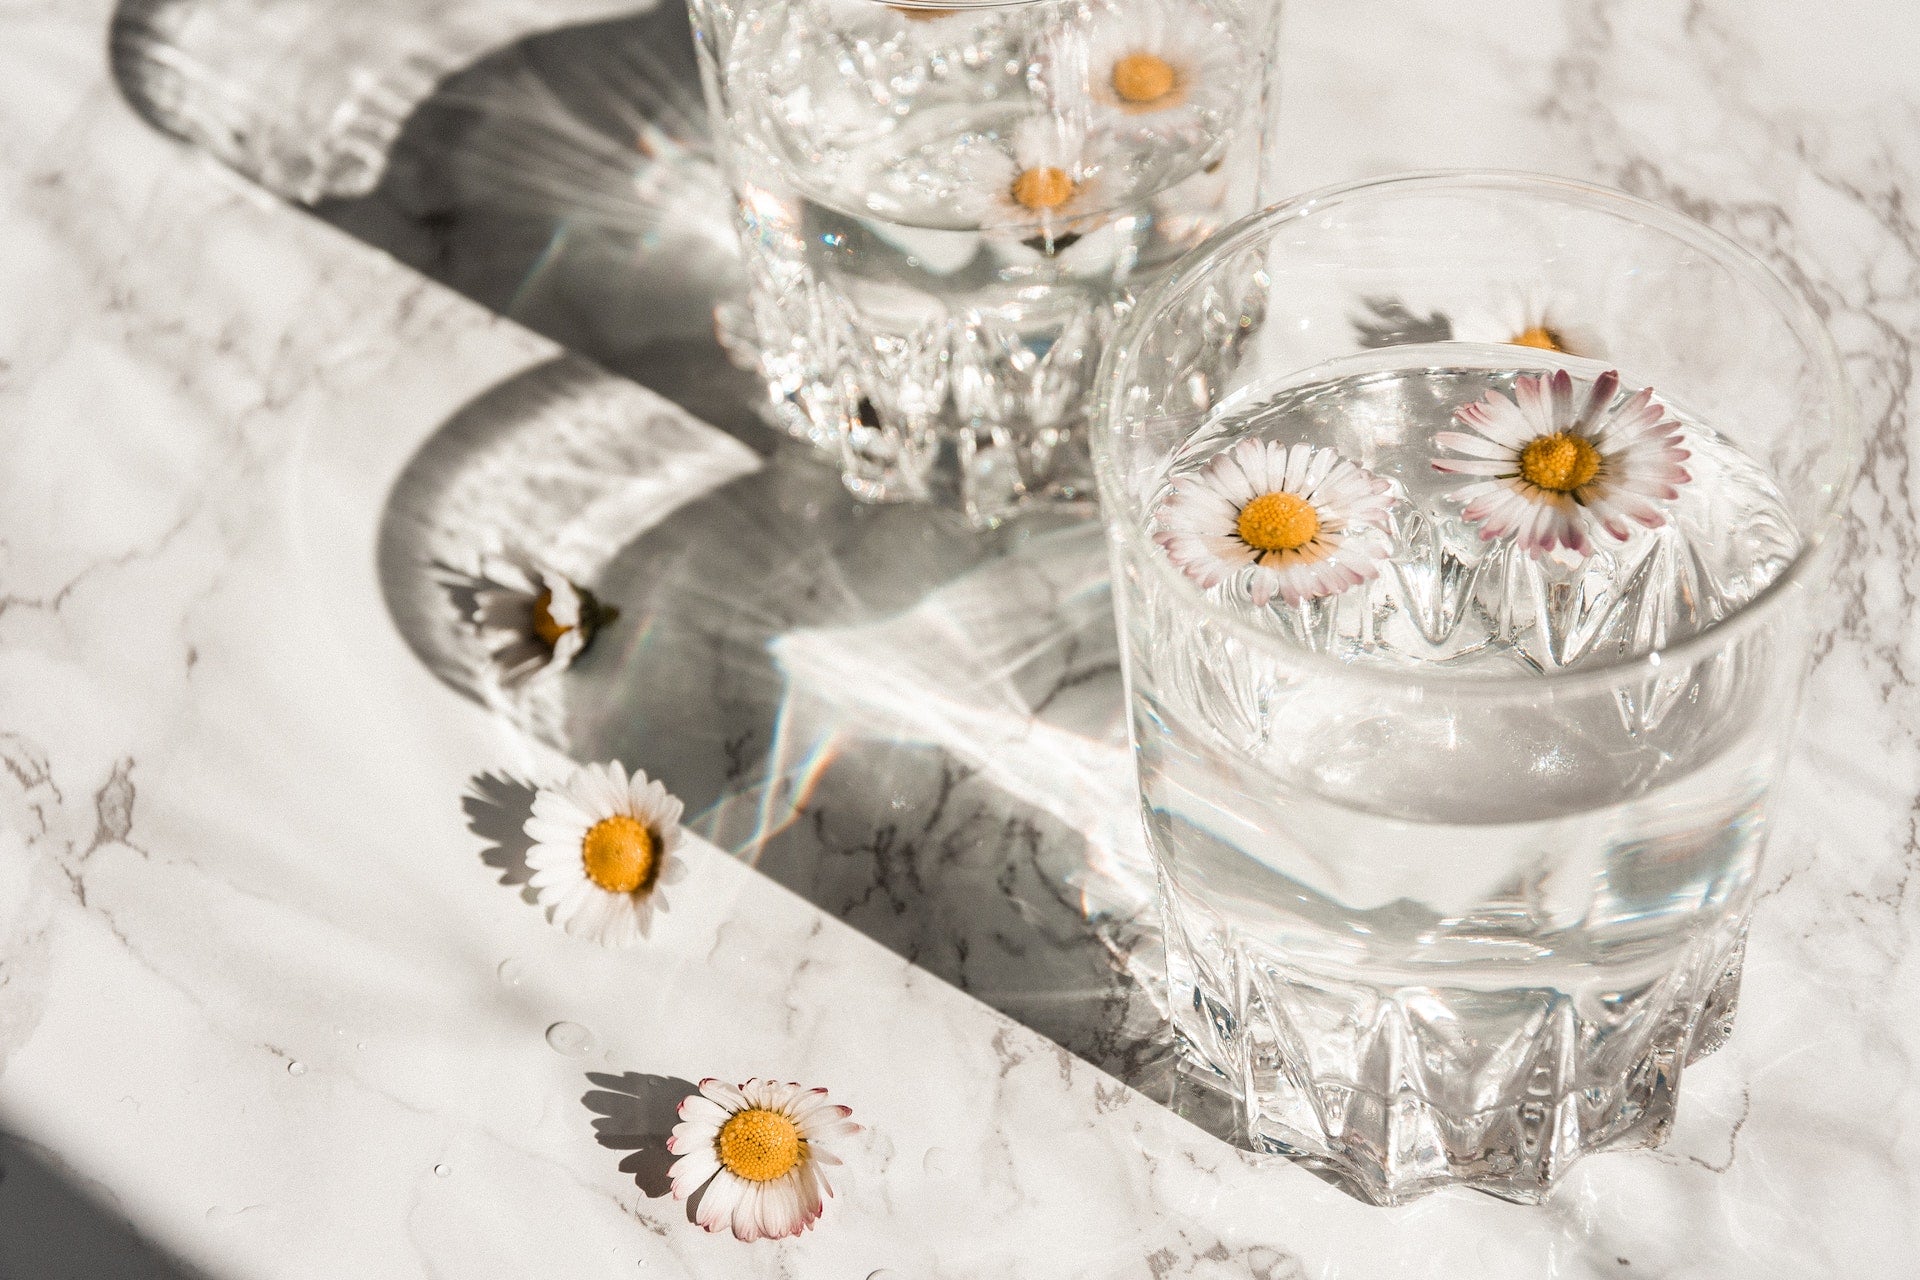 White flowers with yellow center in water and scattered on linens on a table